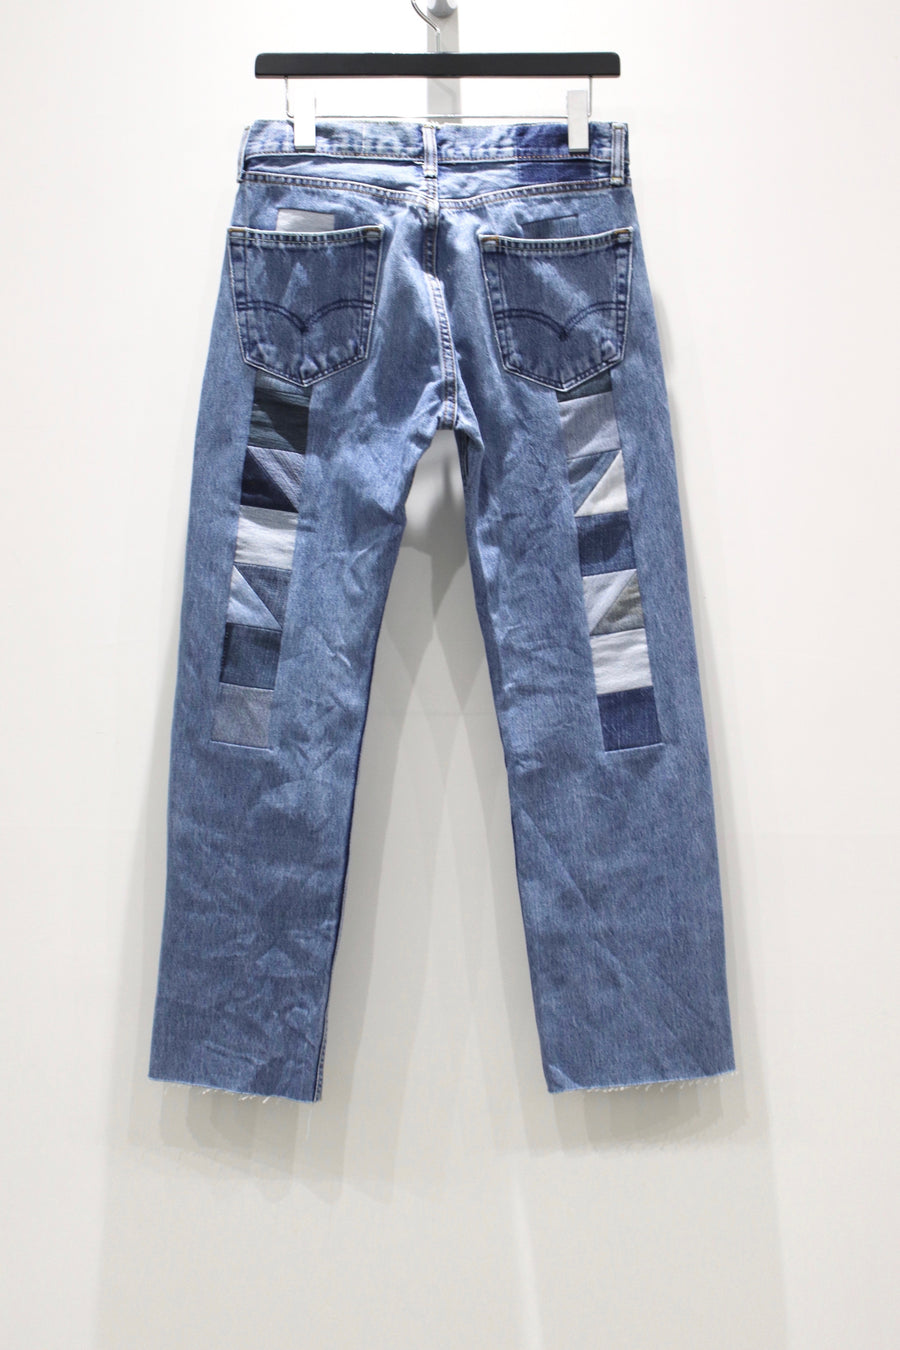 Children of the discordance  NY VINTAGE CUSTOM MADE PATCHDENIM